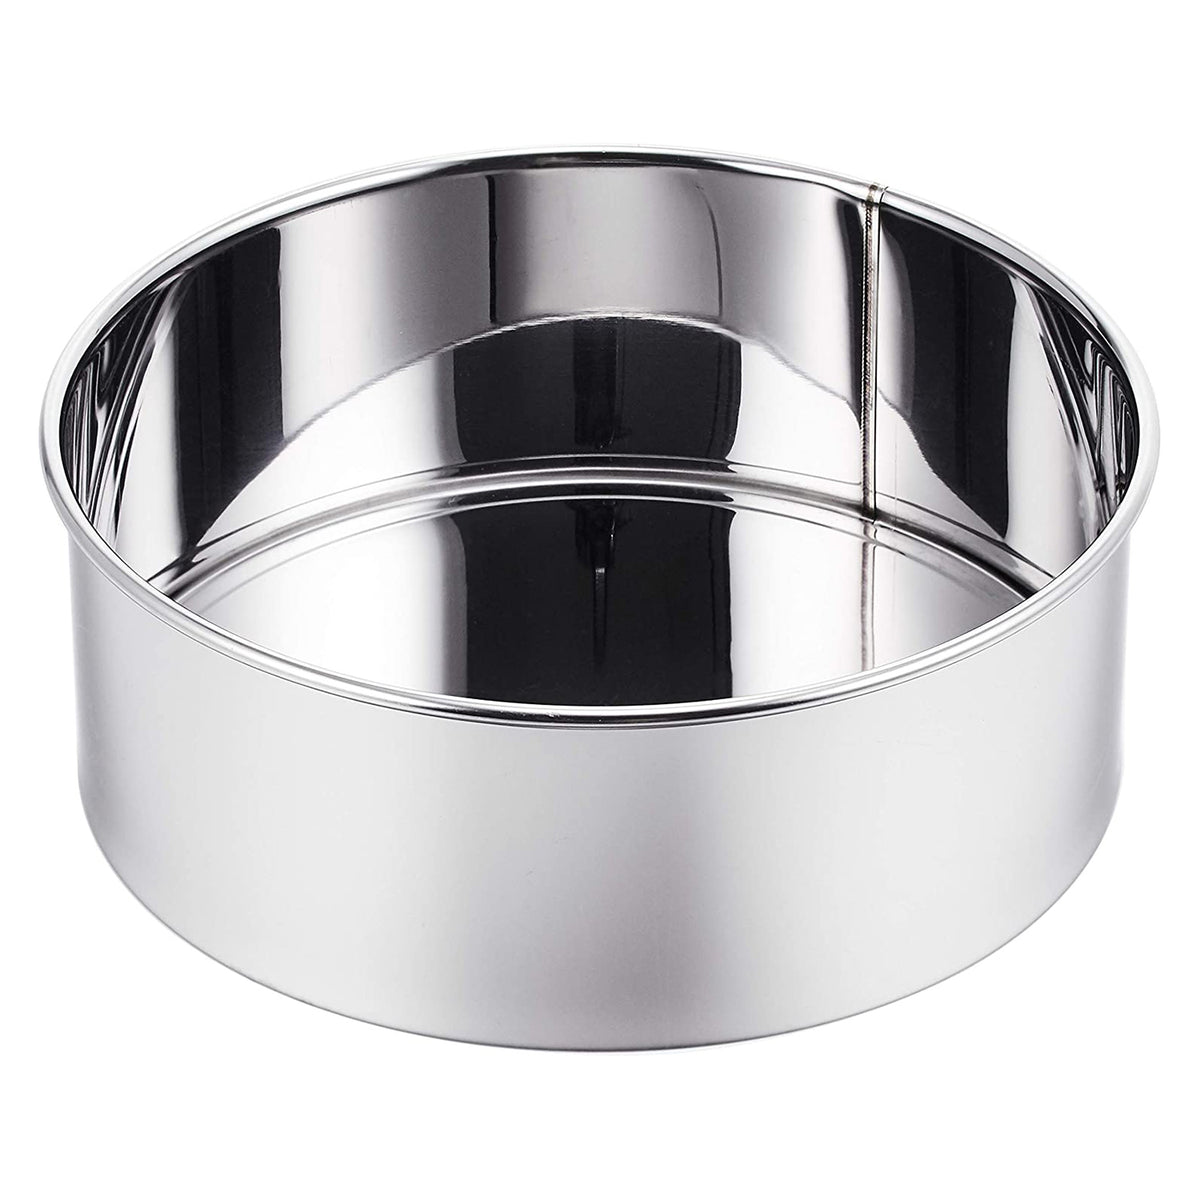 SHIMOTORI Stainless steel Round Cake Pan with Removable Bottom